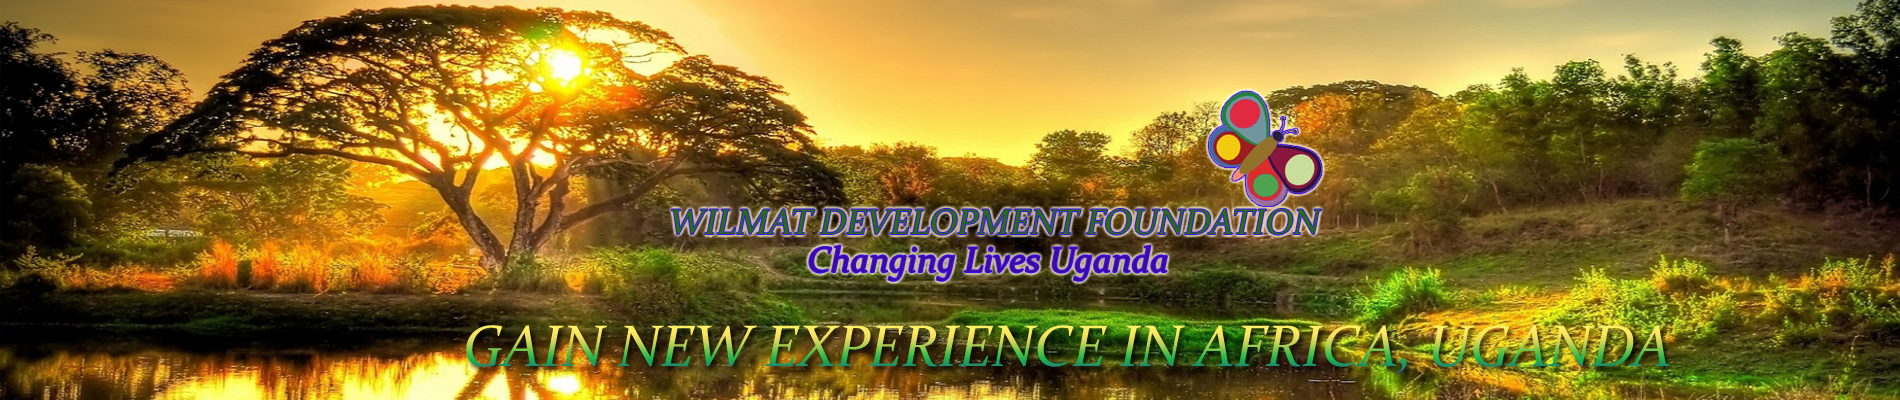 Wilmat Development Foundation invites you to GAIN NEW EXPERIENCE IN AFRICA -Wilmat Development Foundation is an equal opportunity entity that offers Internship placements to both National and International university, high school students all around the world.